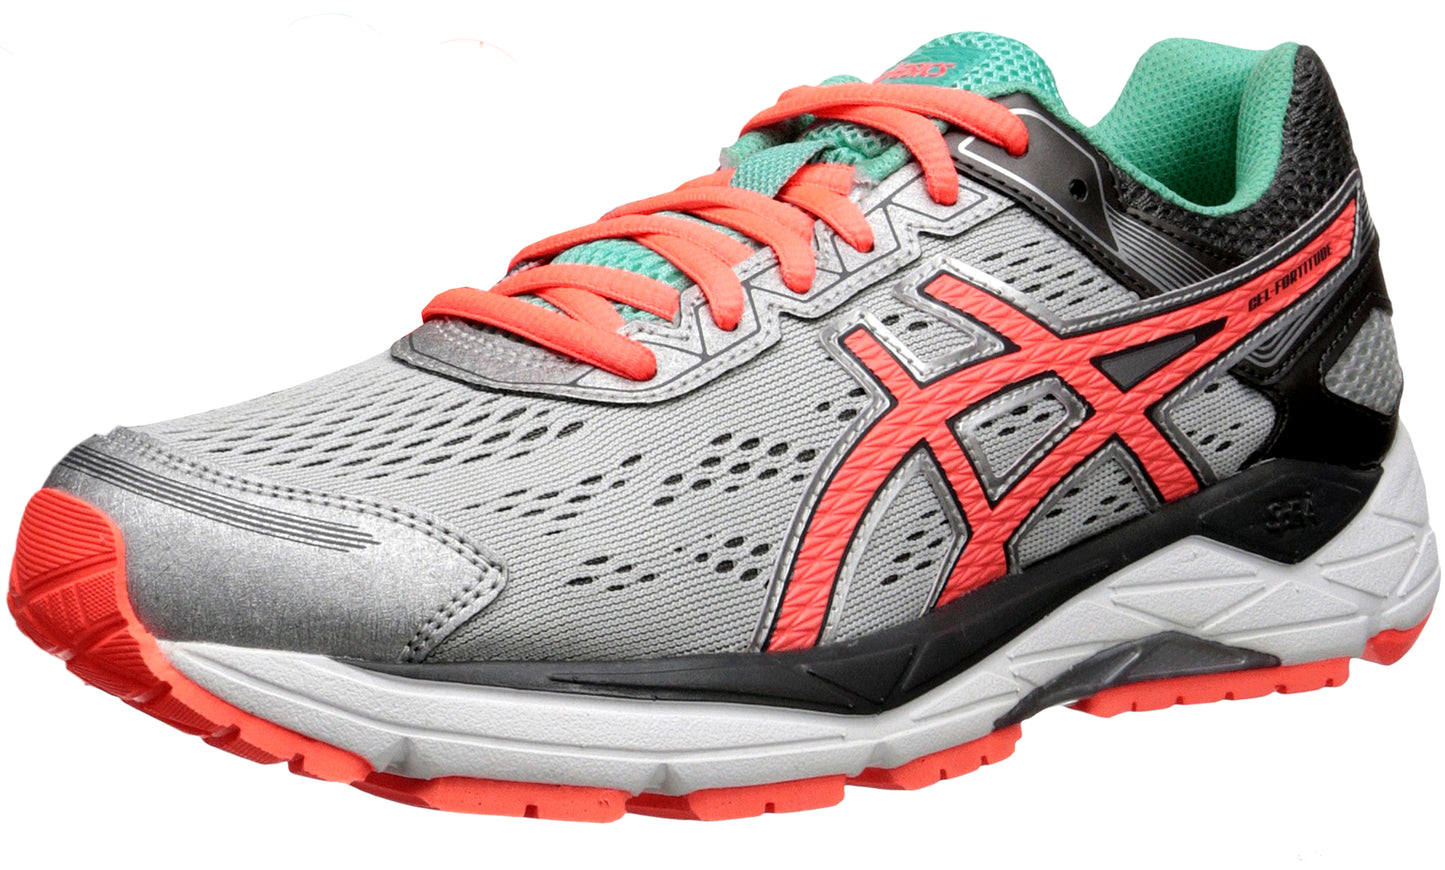 Lateral of Silver/Coral/Aqua/Mint ASICS Women Gel Fortitude 7 Wide Width Running Shoes for Supinators